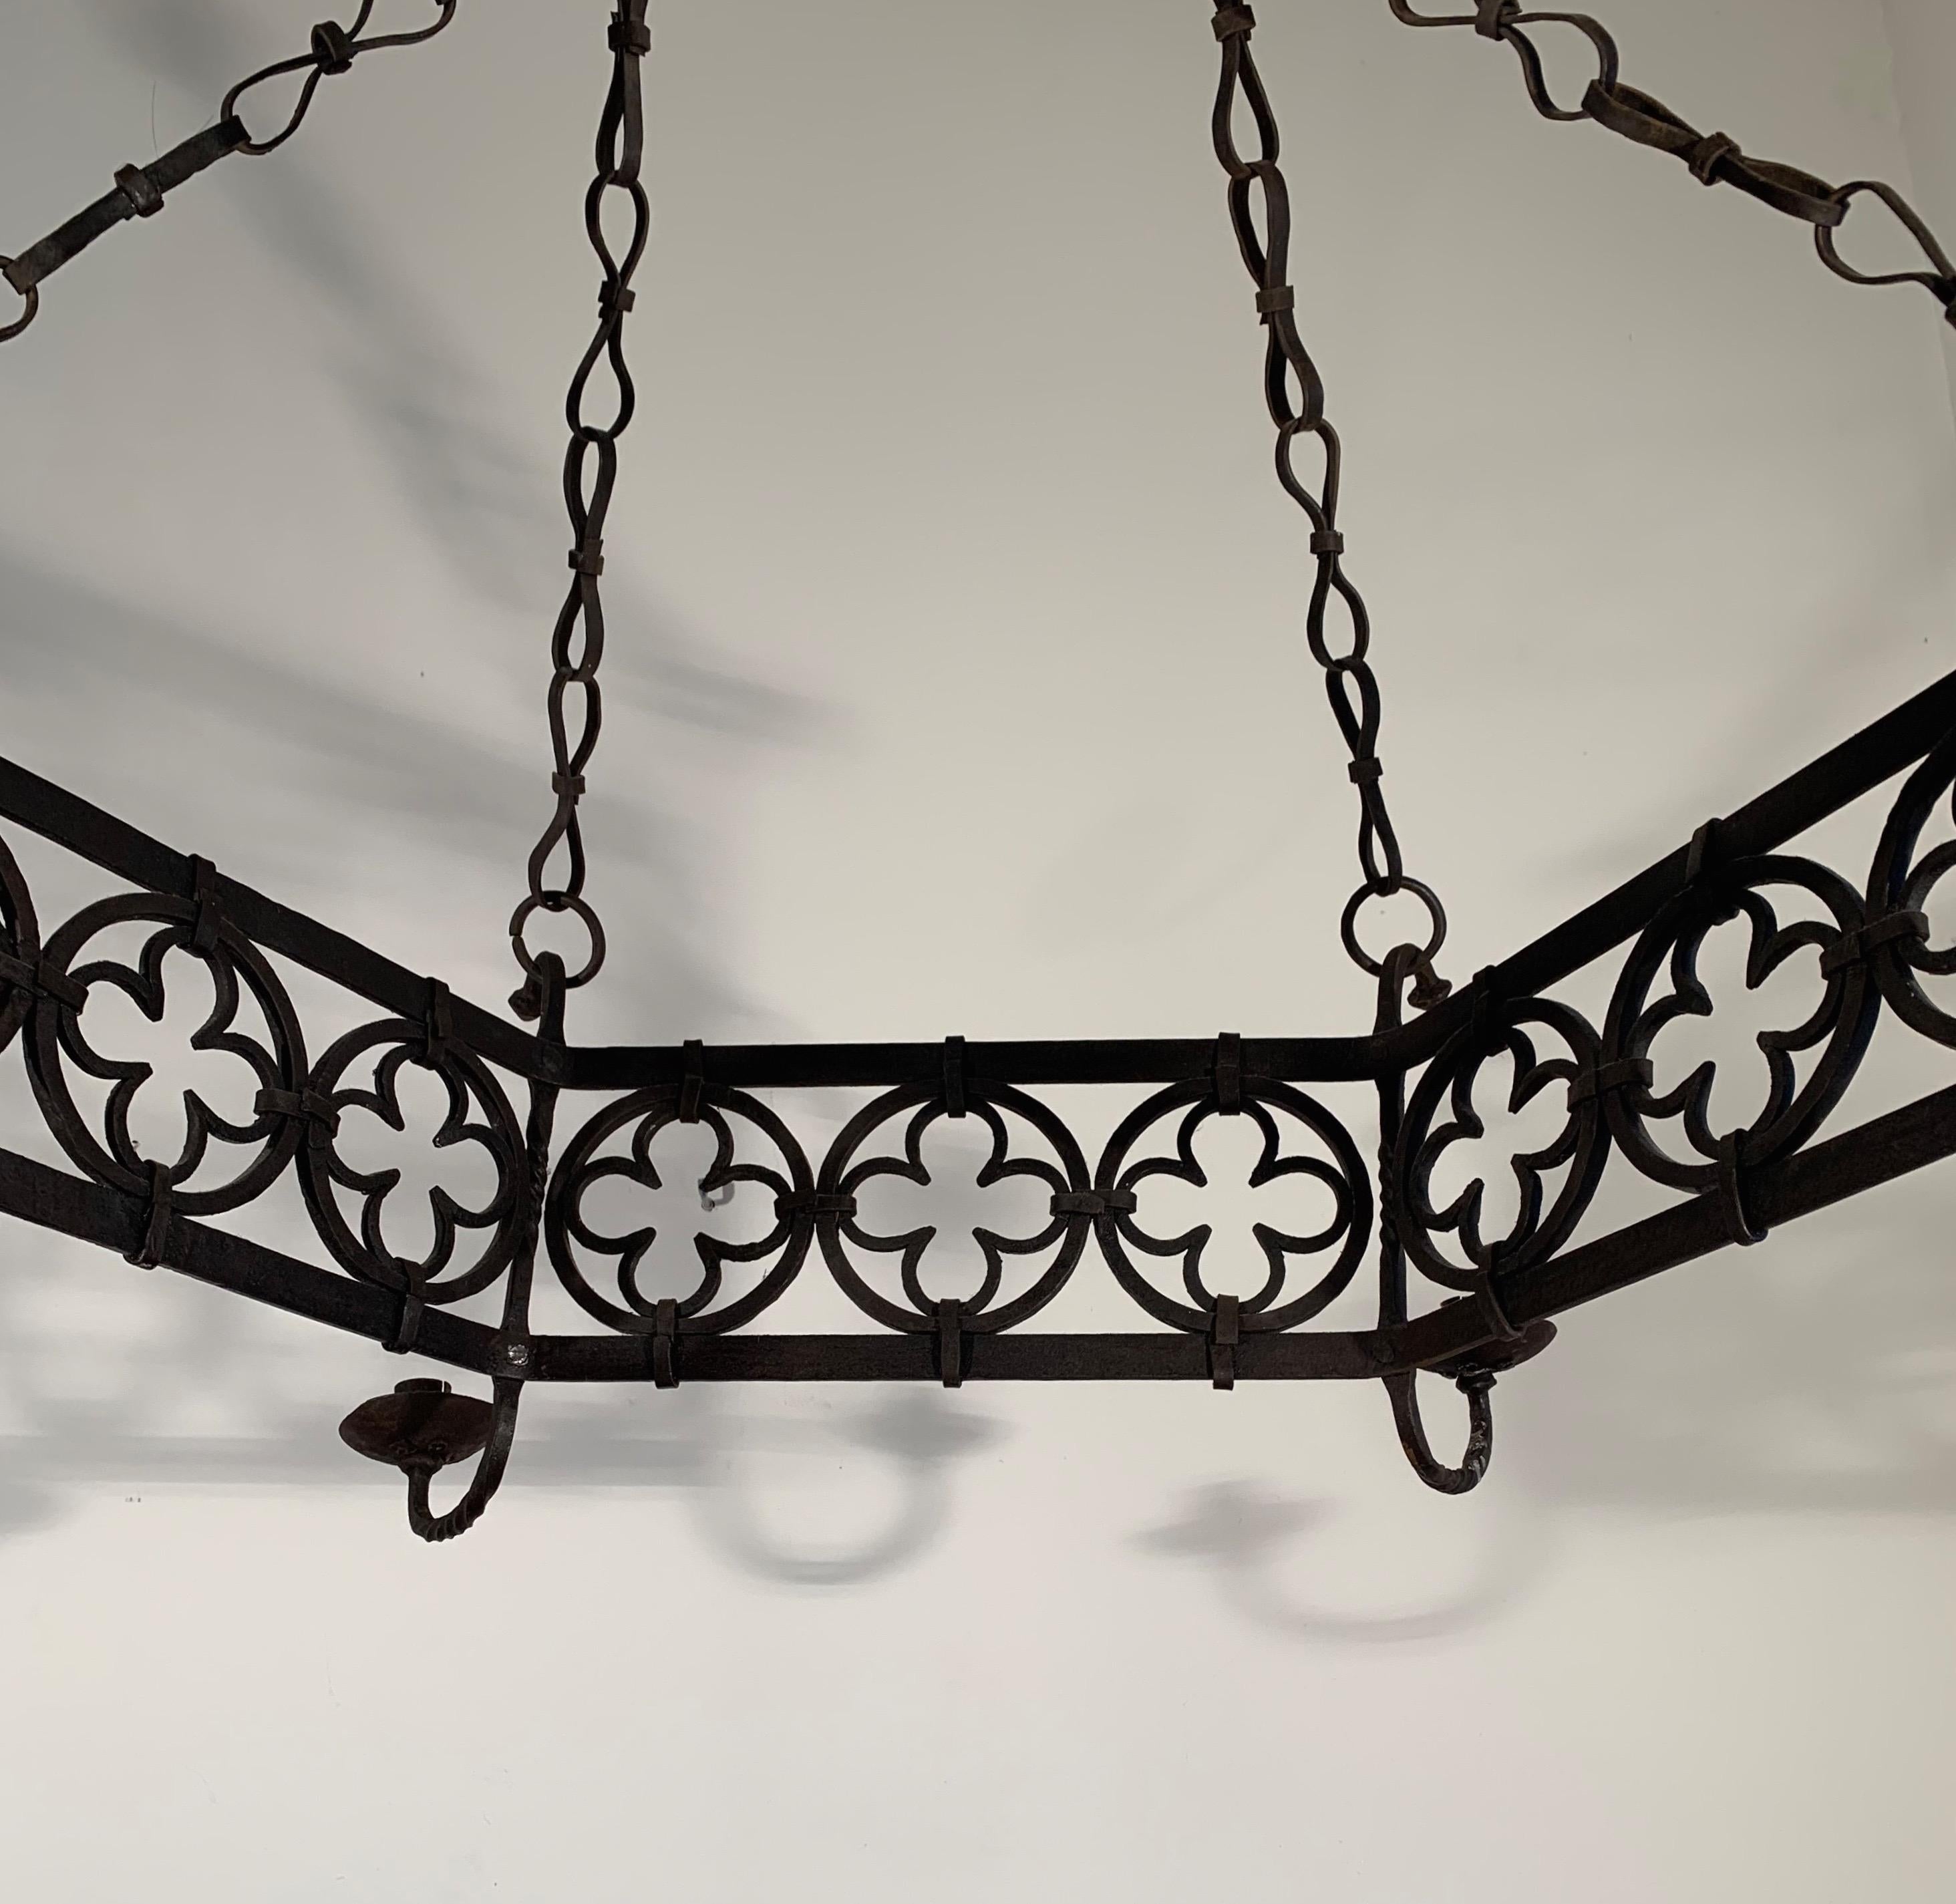 Forged Large Gothic Revival Wrought Iron Chandelier for Dining Room / Restaurant Etc For Sale